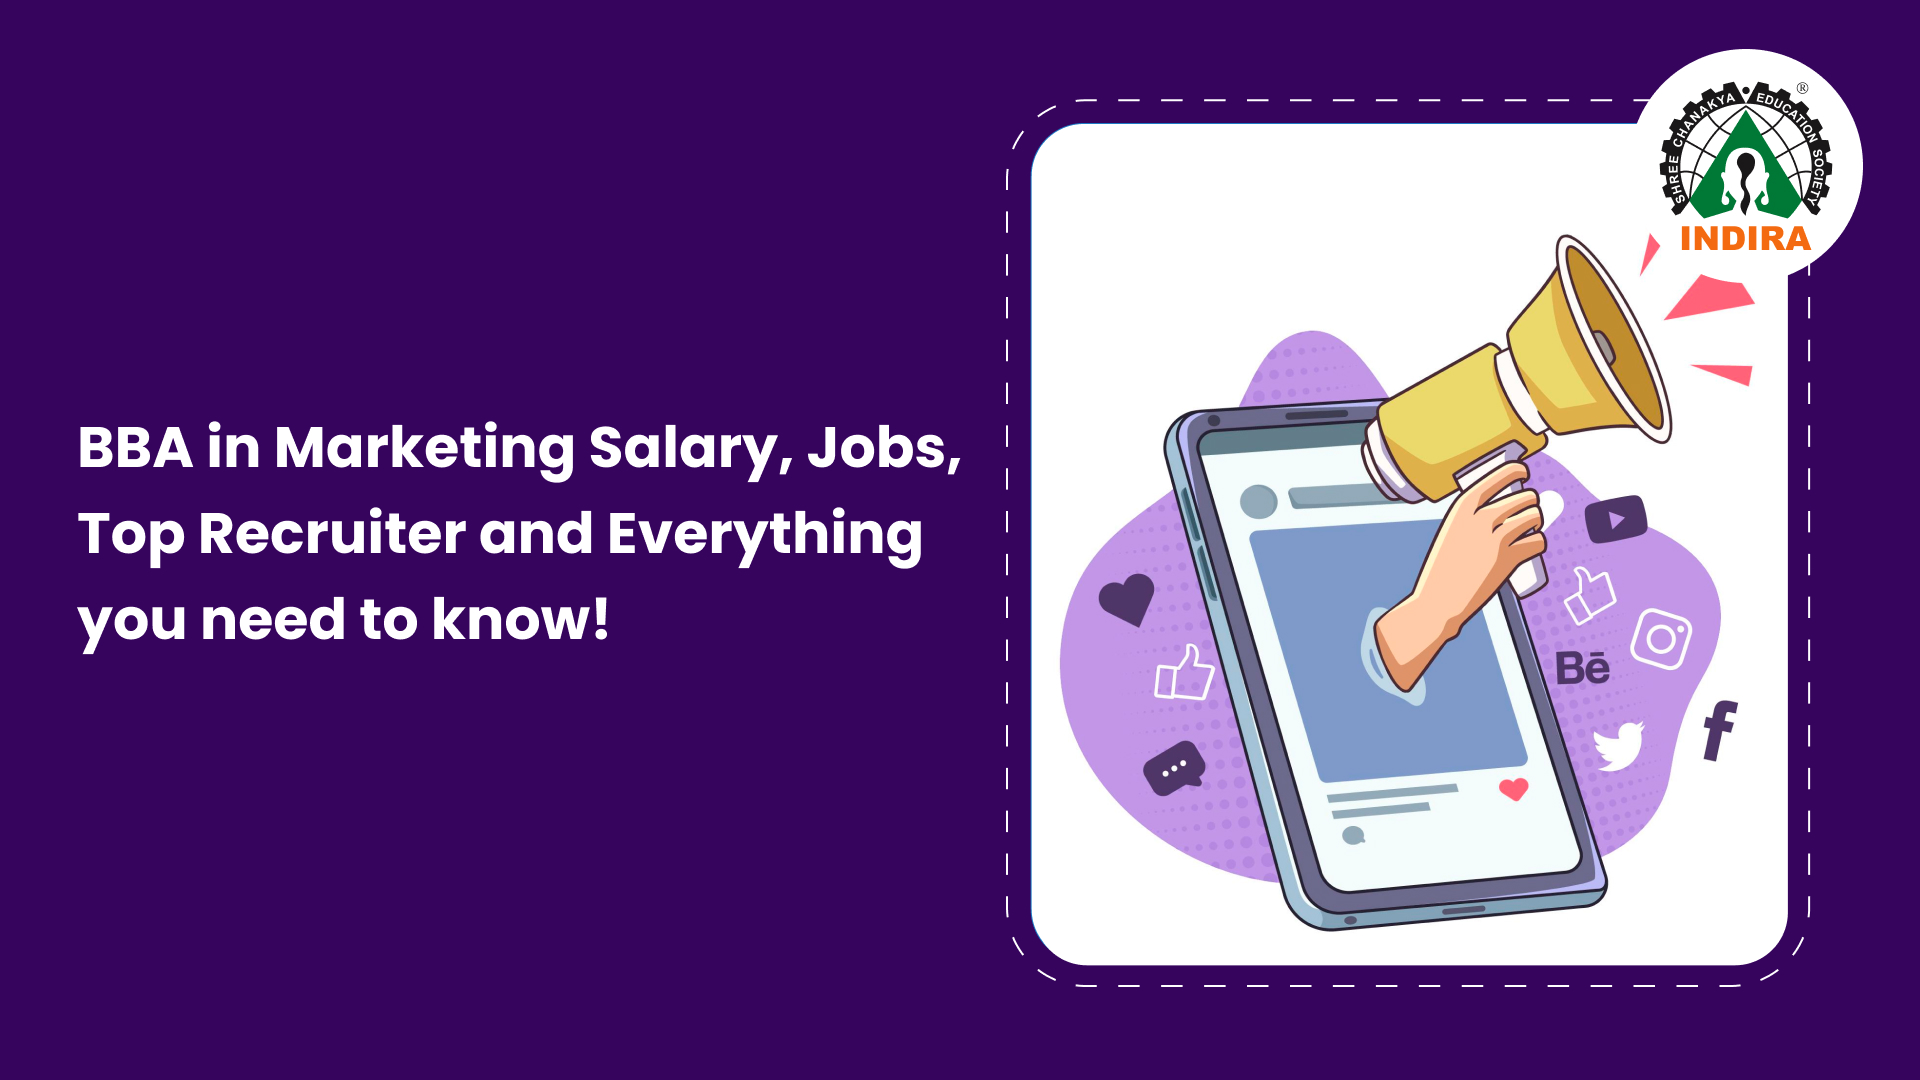  BBA in Marketing Salary, Jobs, Top Recruiter and Everything you need to know!